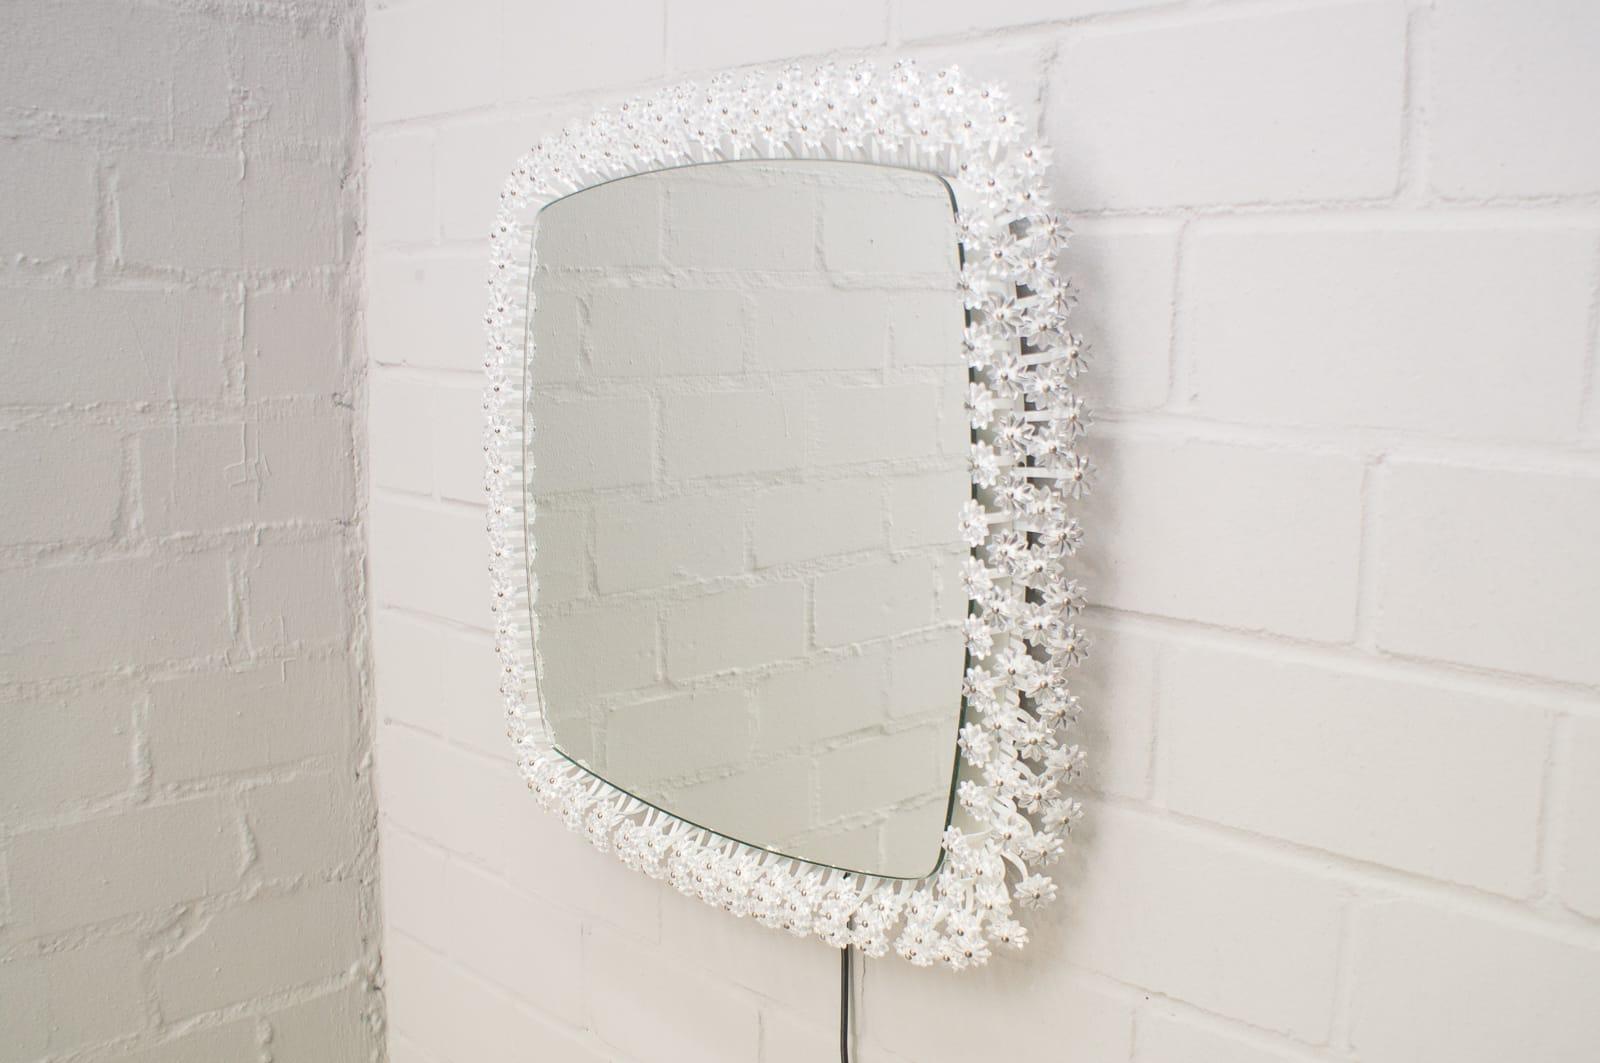 Hollywood Regency Large Illuminated Wall Mirror with Glass Flowers by Emil Stejnar - Rupert Nikoll